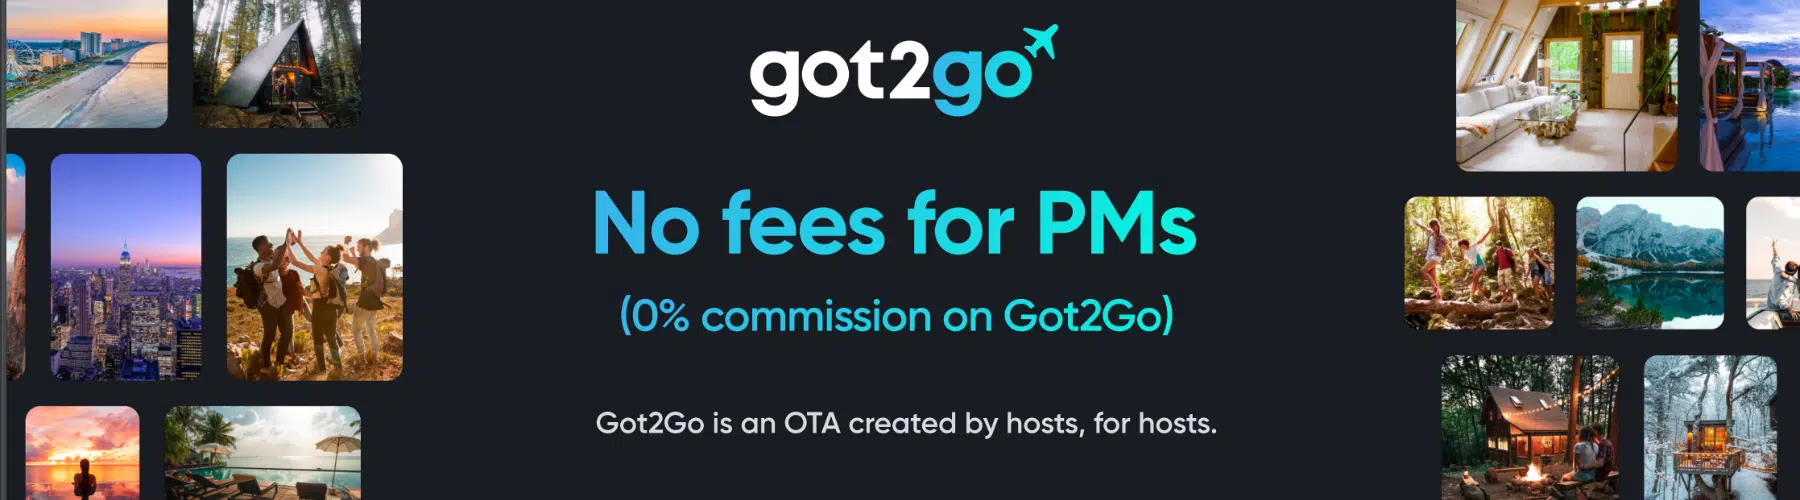 Exclusive Got2Go promo: no fees for property managers